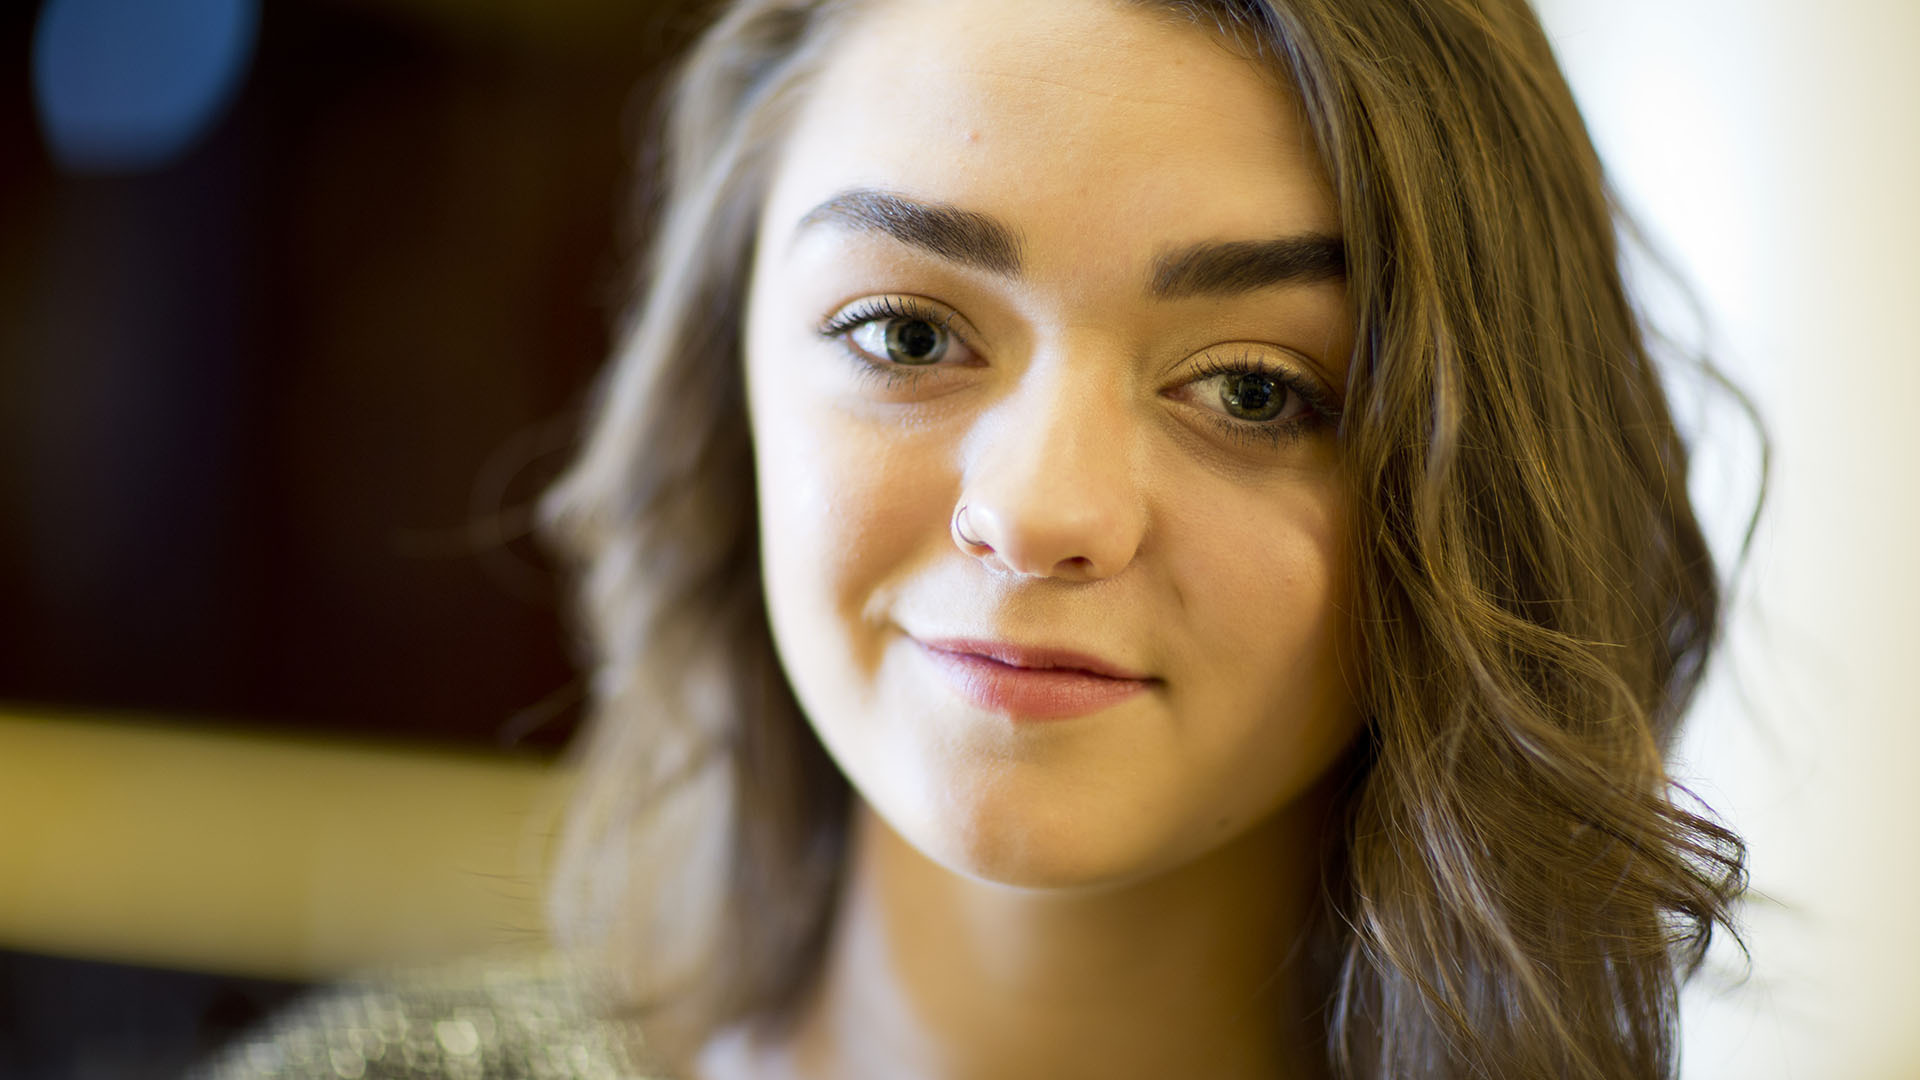 Maisie Williams Wallpaper Image Photos Pictures Background